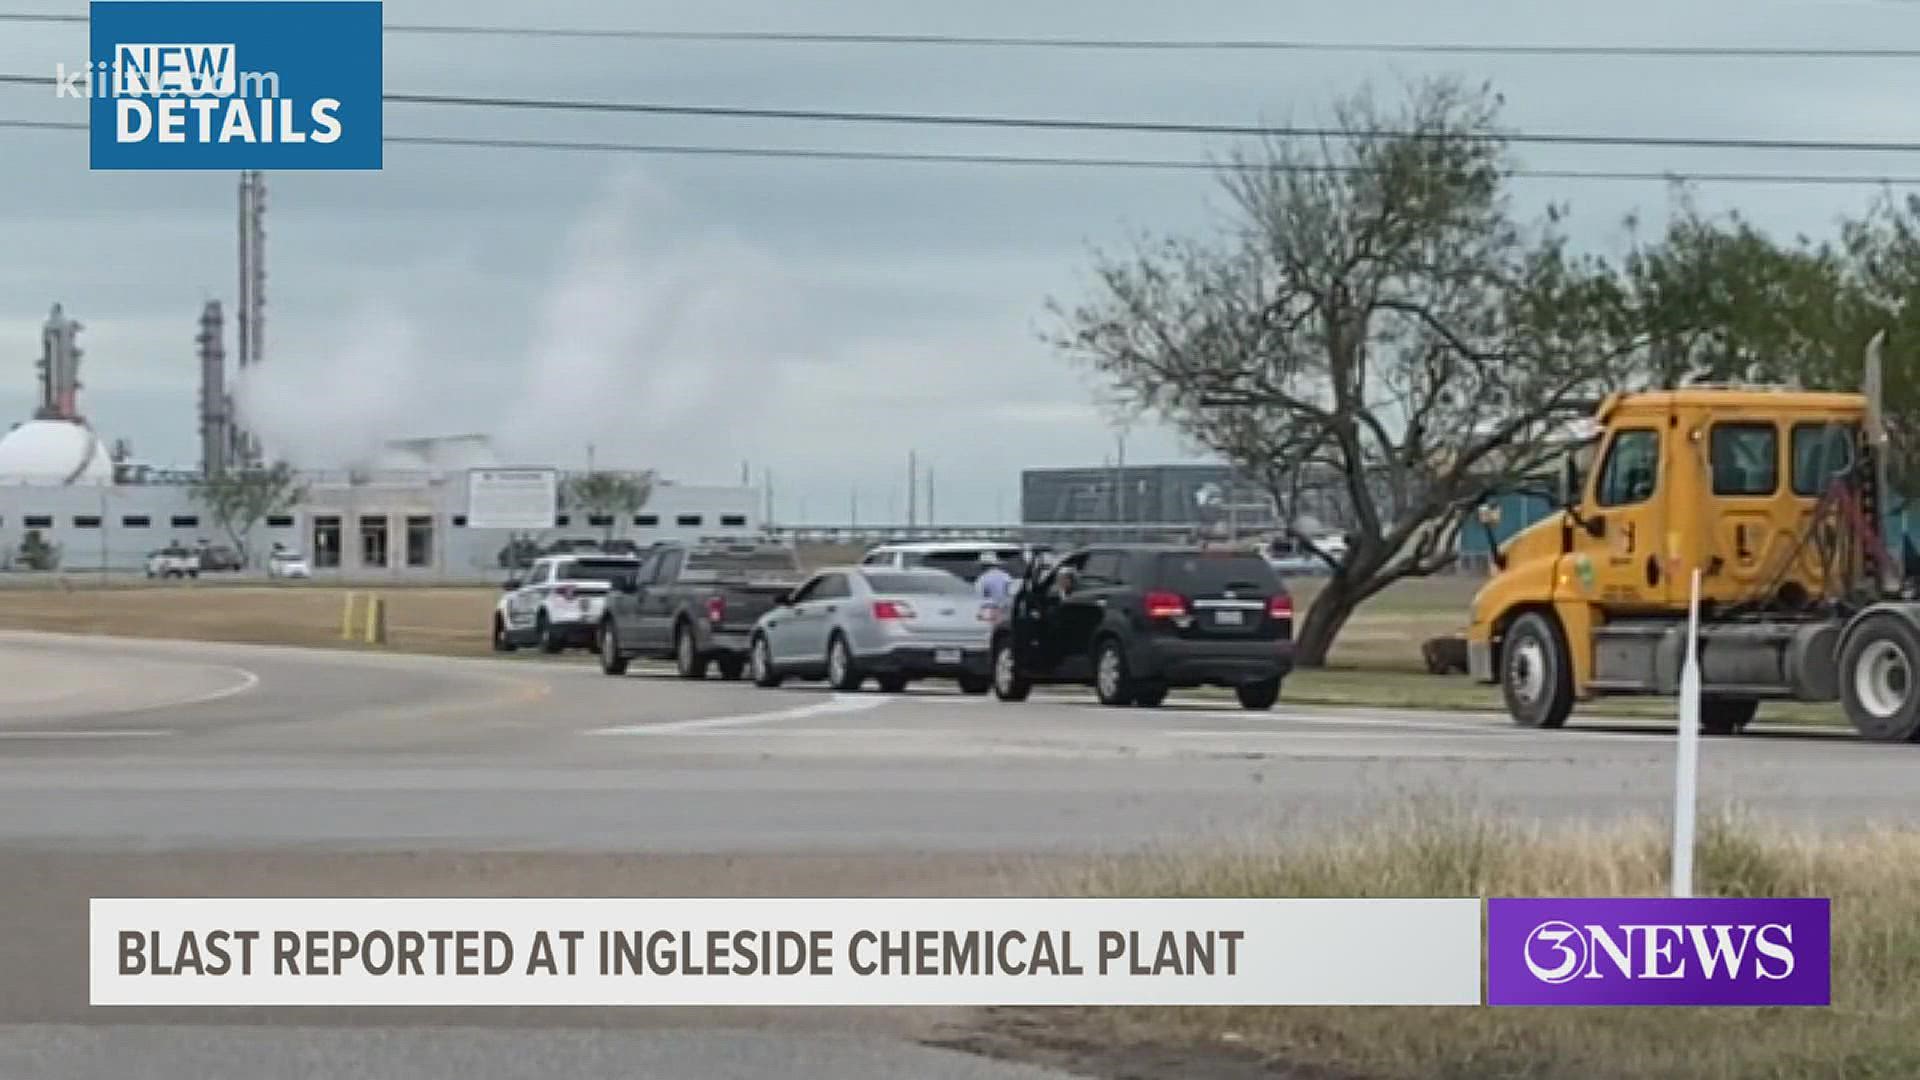 Oxy Chem and the nearby Chemours Ingleside plant had personnel shelter in place as they contained the fire.